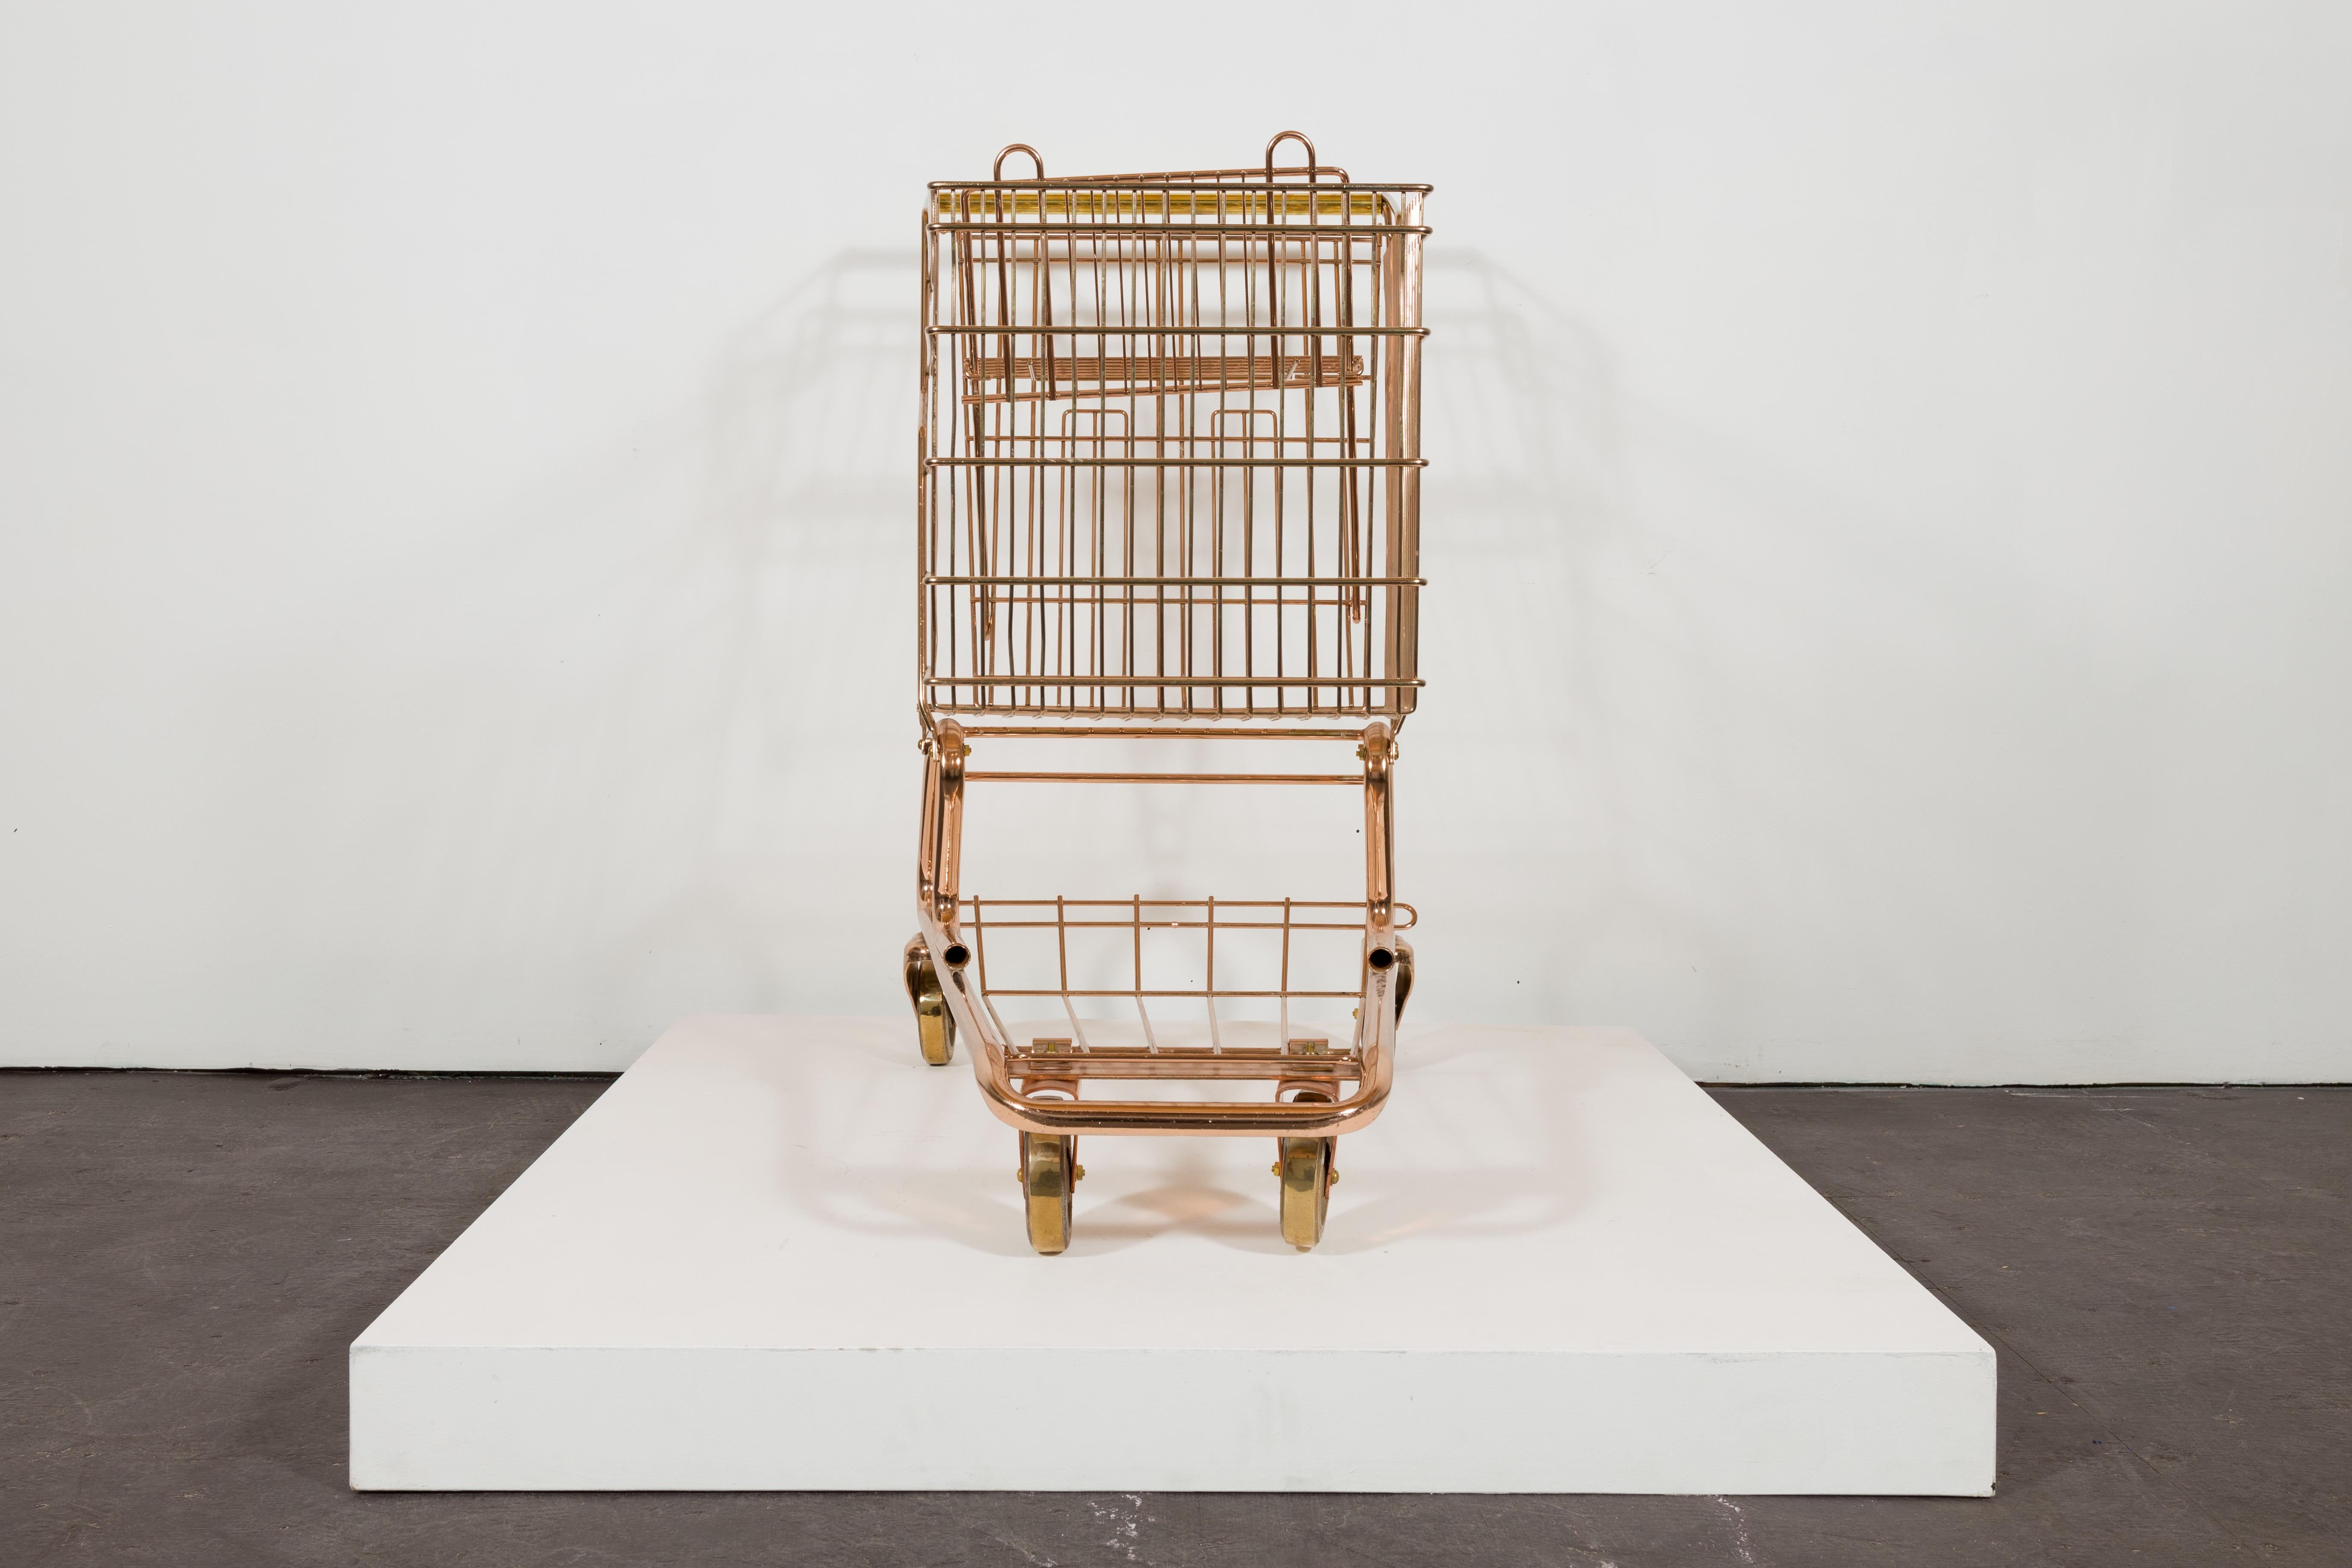 Shopping Cart - Contemporary Sculpture by Zeke Moores